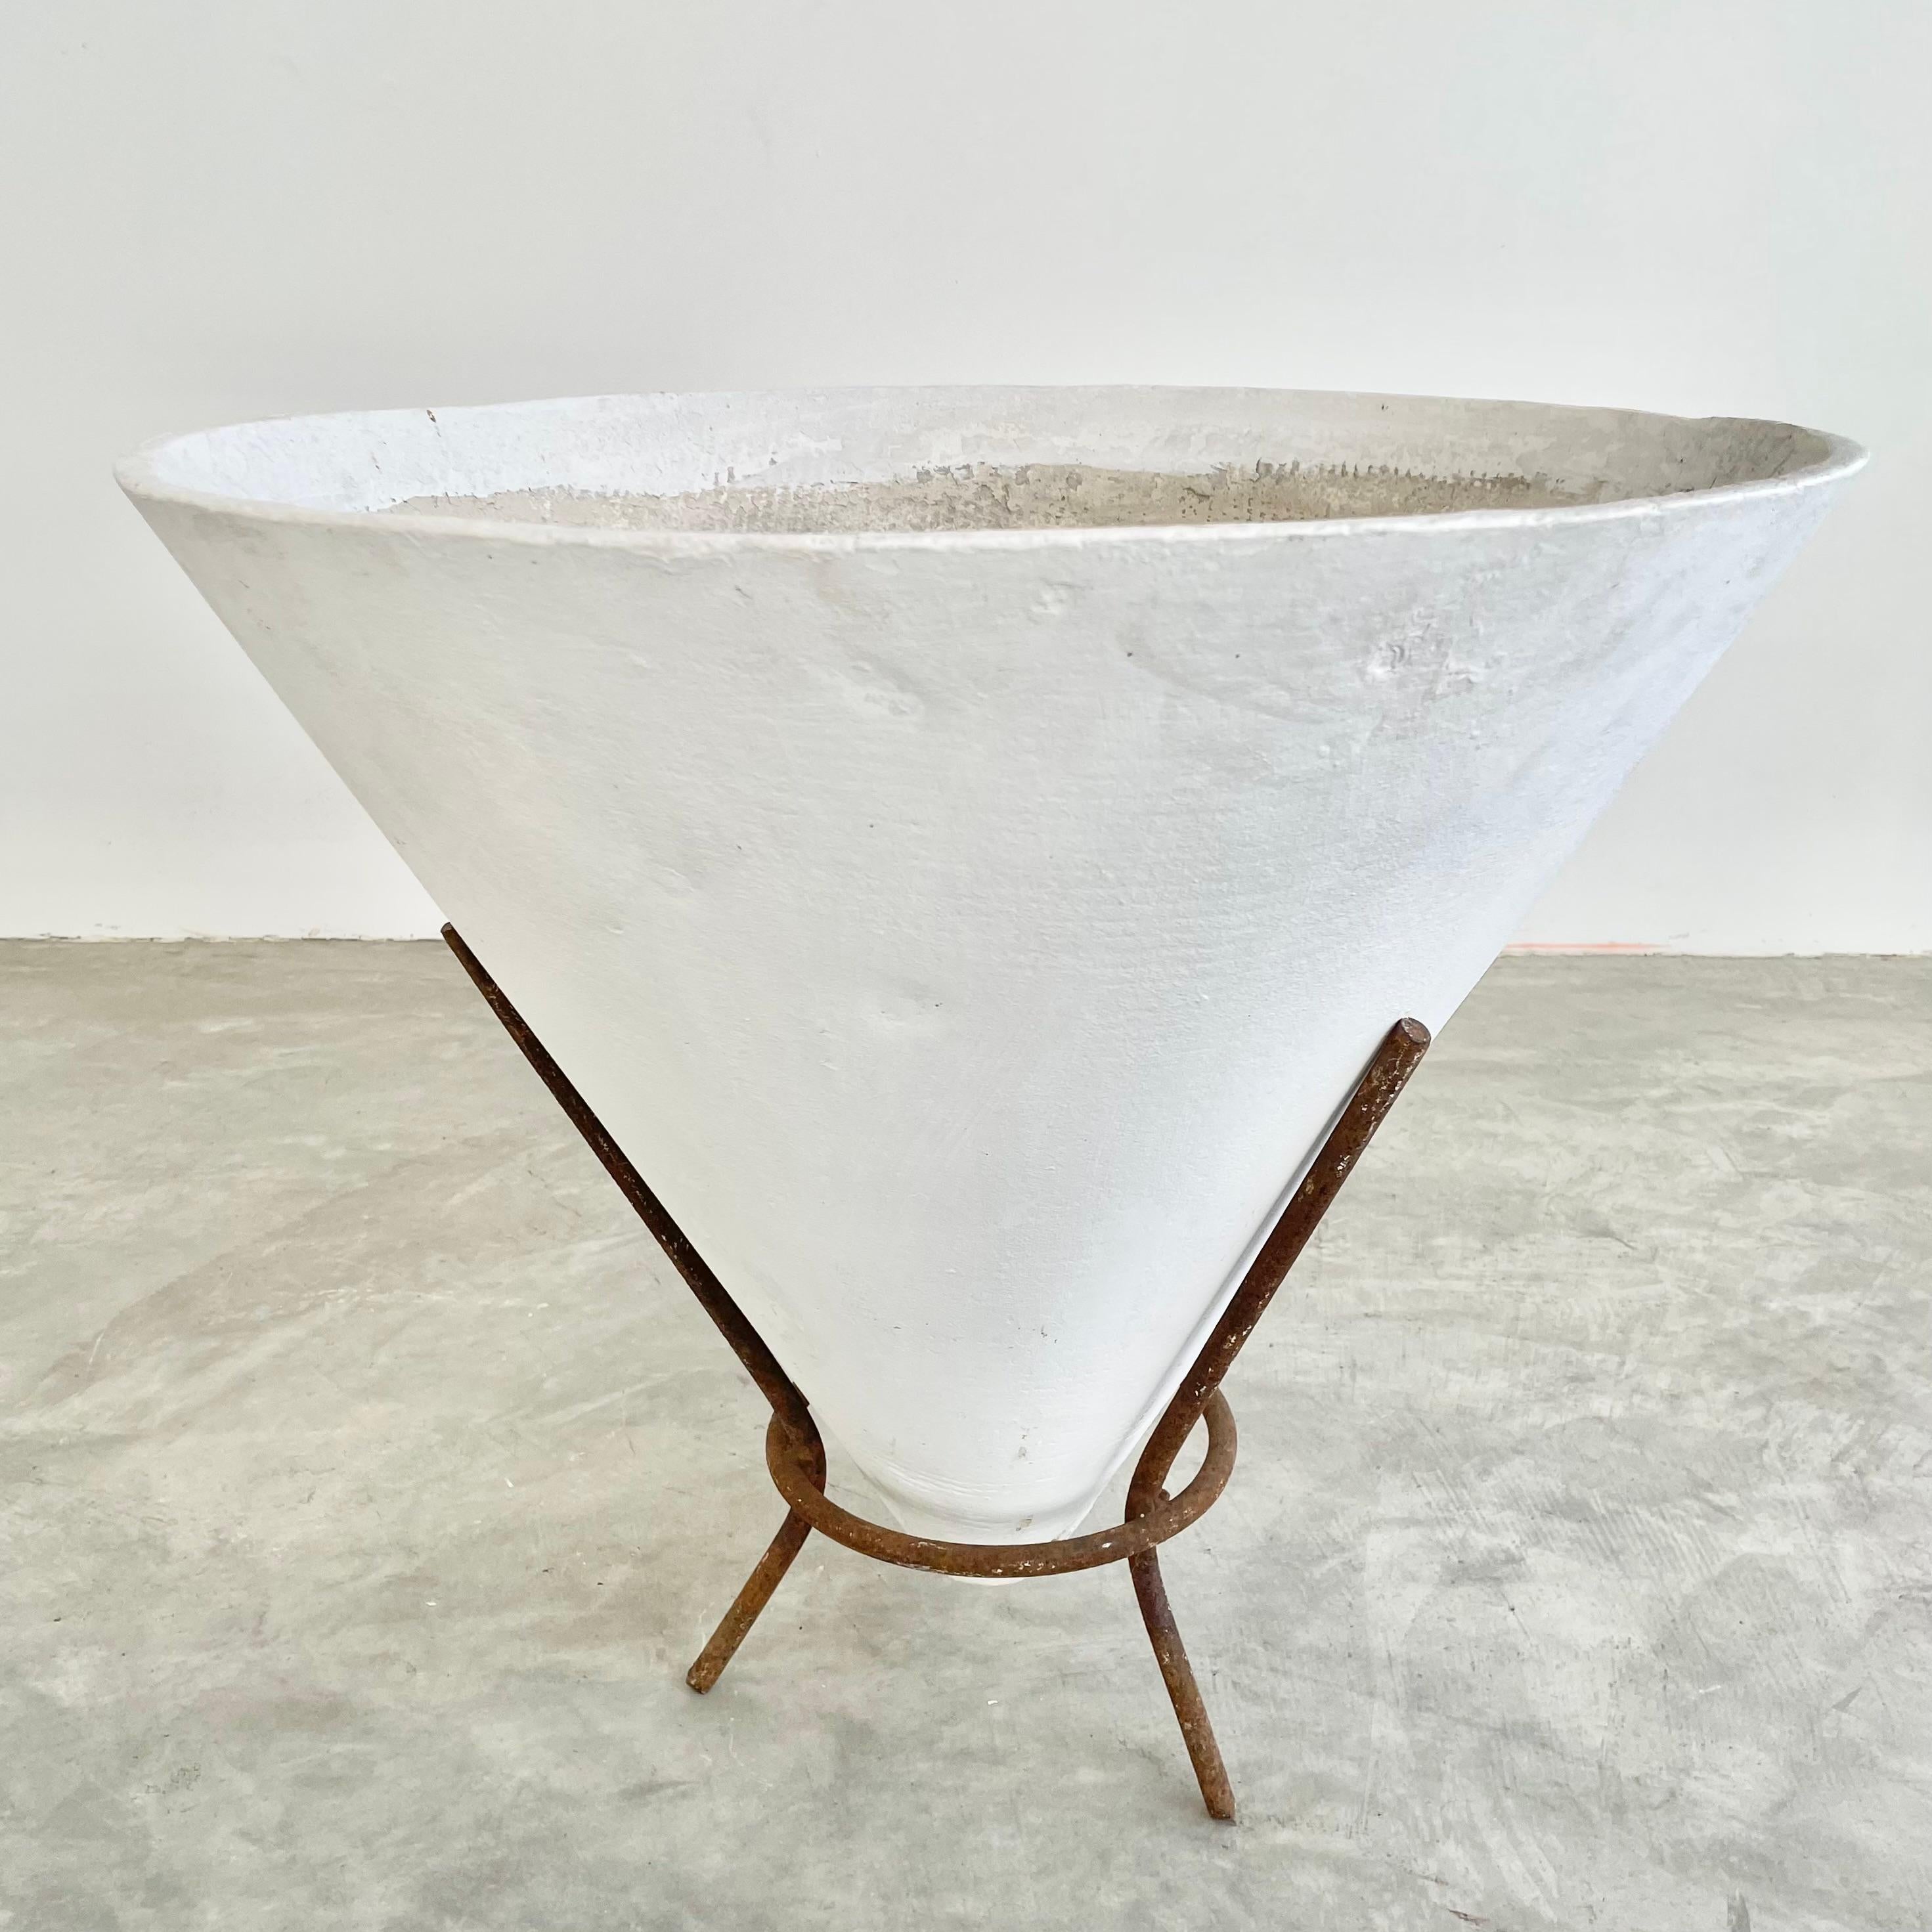 Mid-20th Century Willy Guhl Concrete Cone Planter on Iron Stand, 1960s Switzerland For Sale